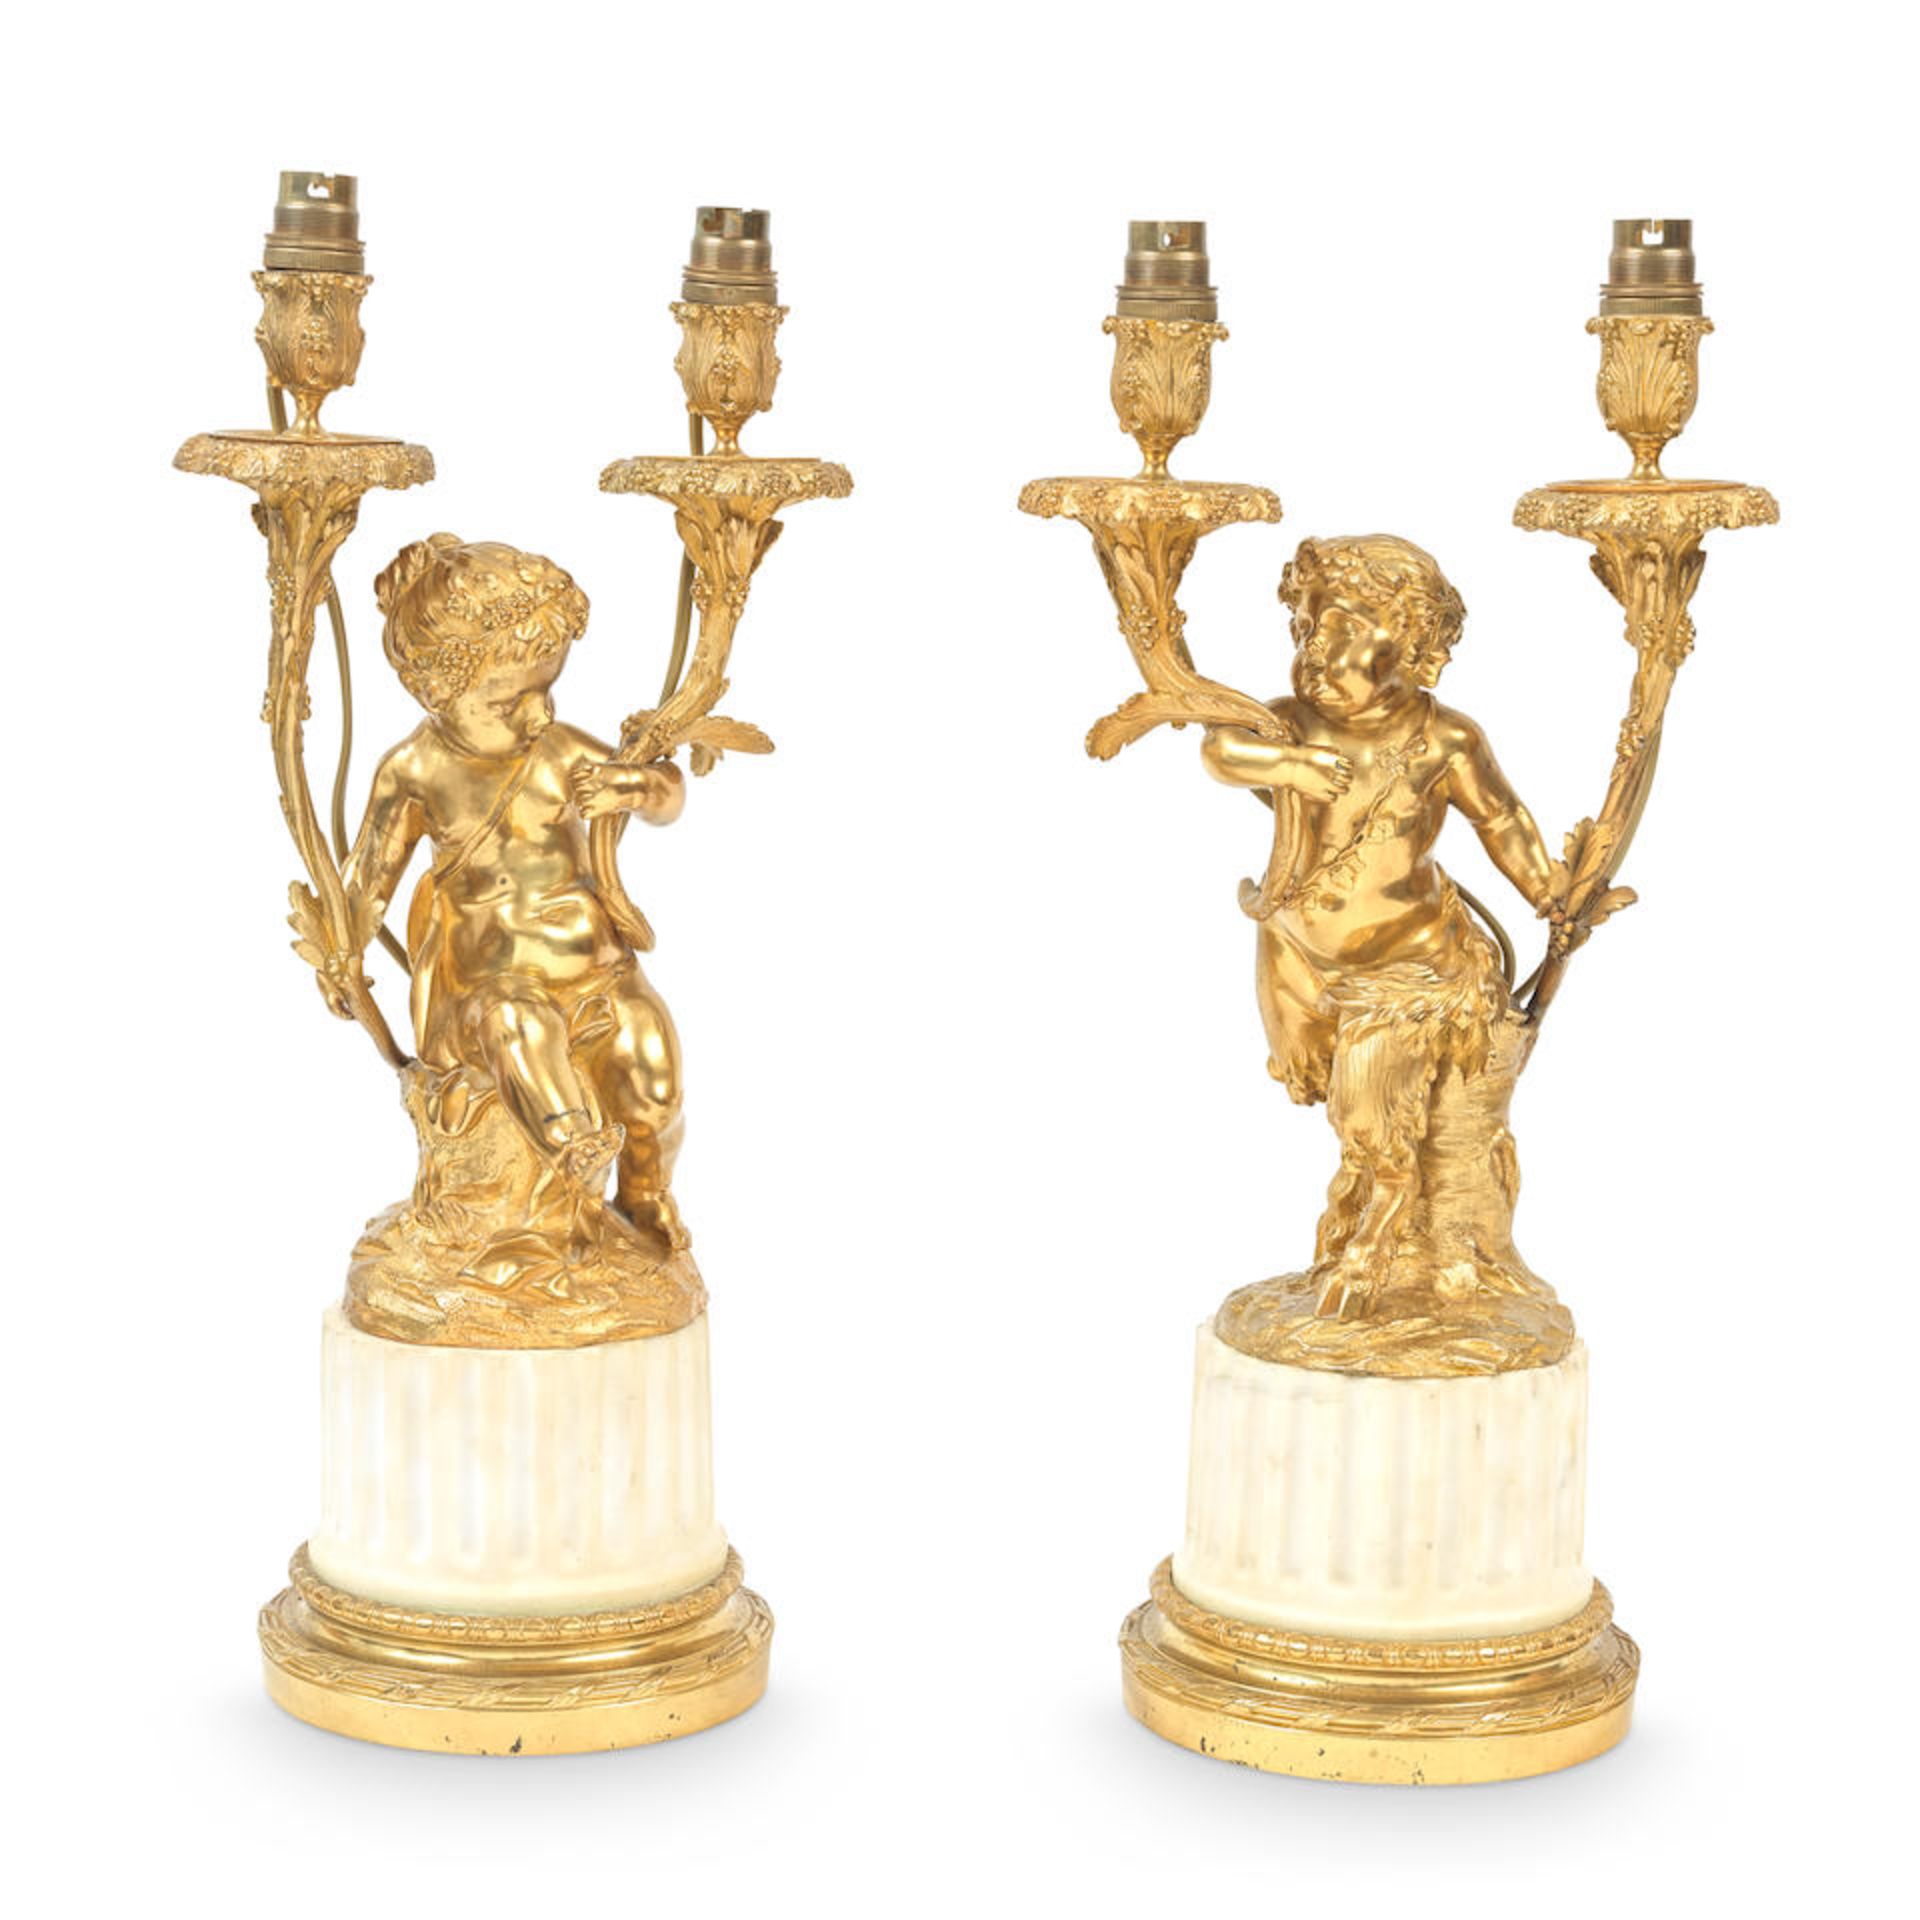 A pair of French gilt bronze and white marble figural candelabra in the manner of Clodion, prob...